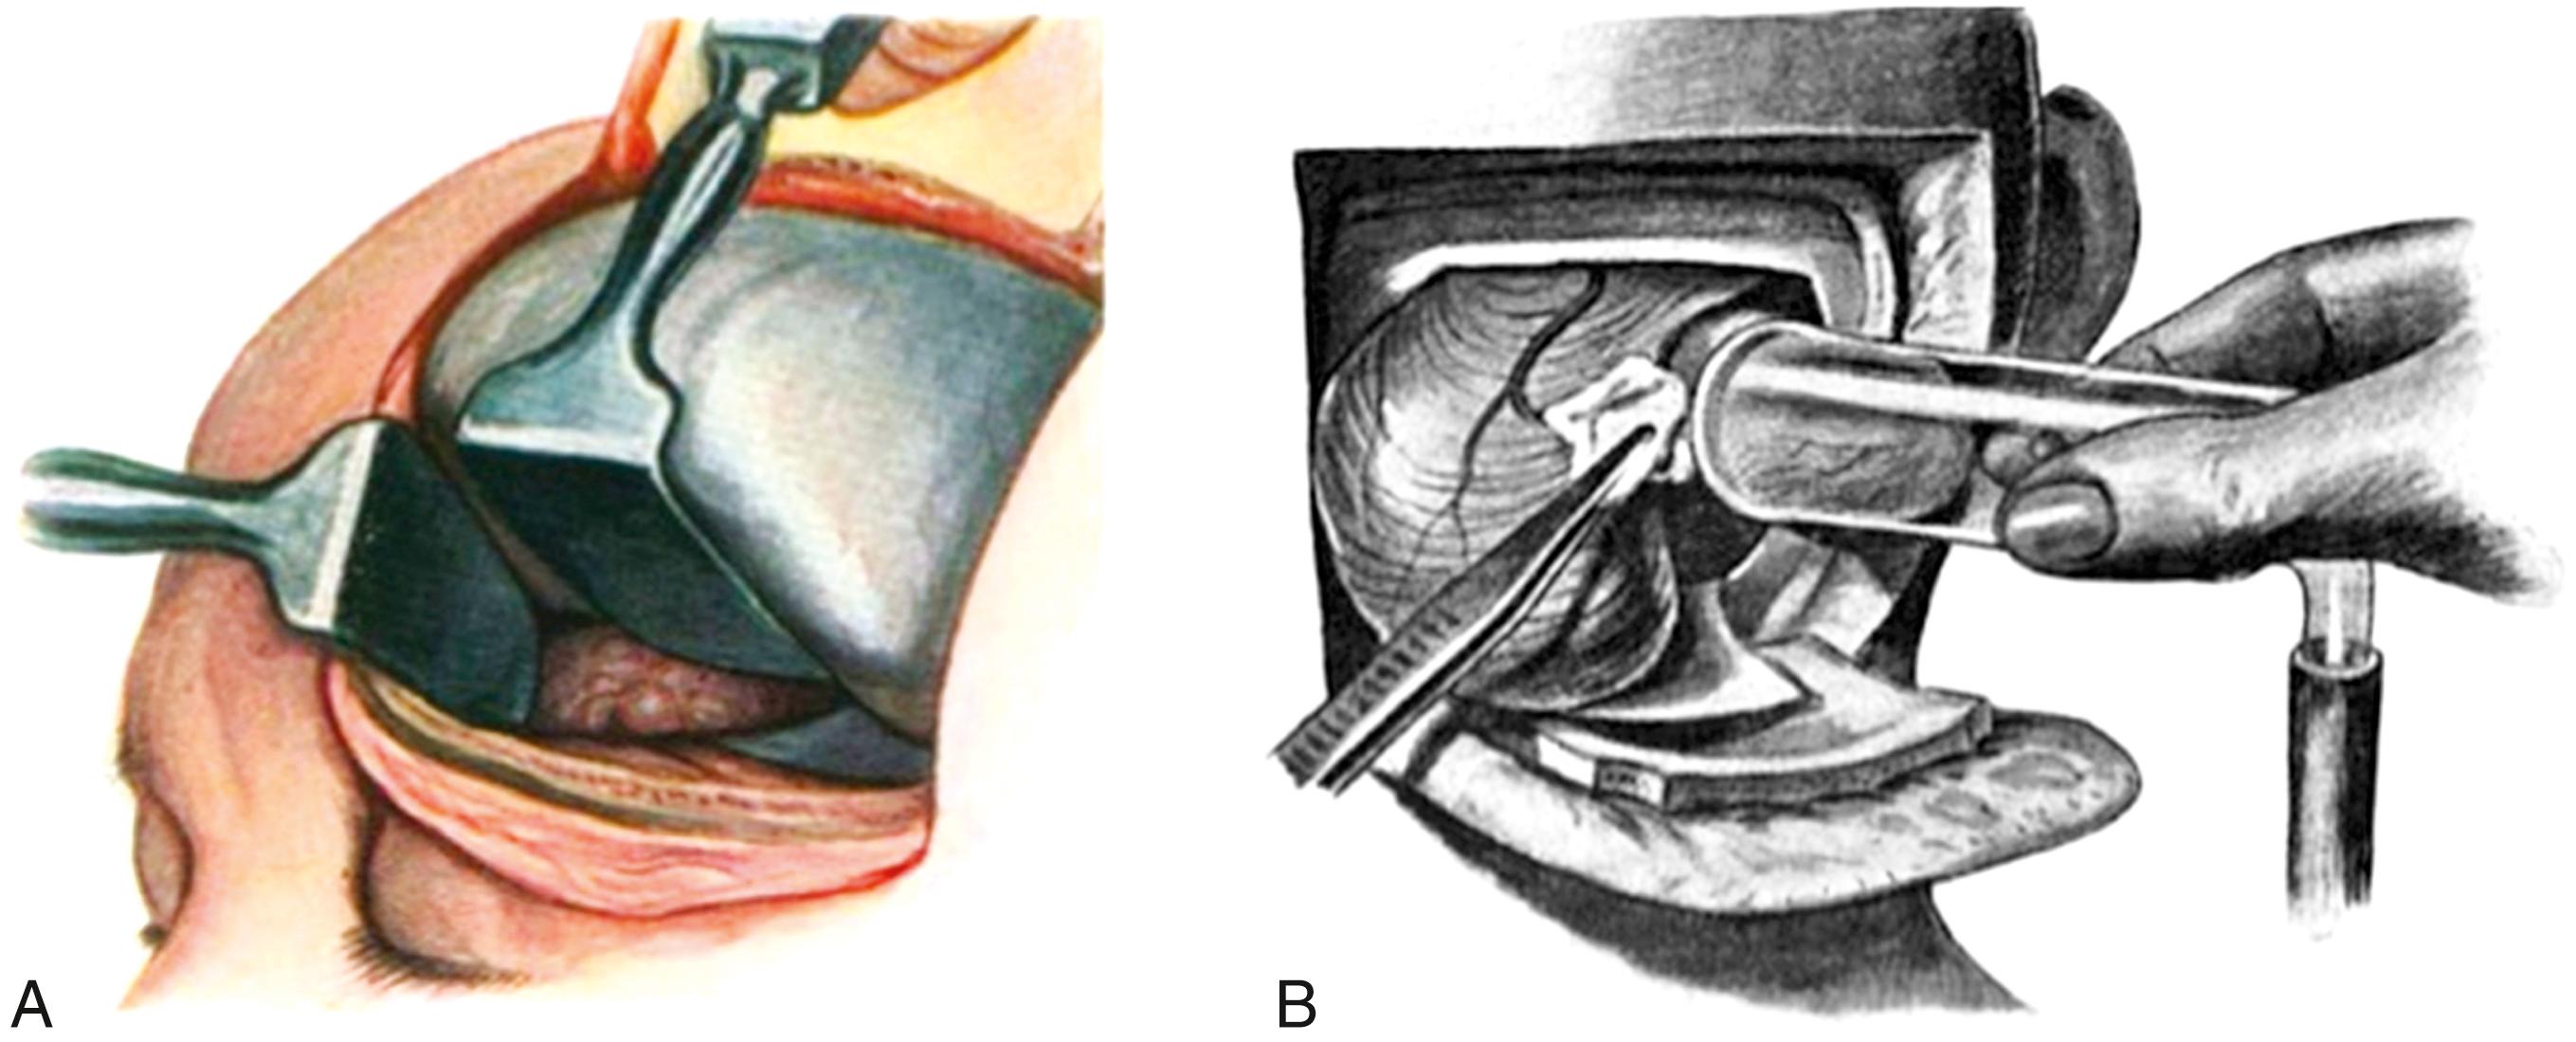 eFigure 33.3, (A) Krause’s retraction of the frontal lobe with a handheld retractor to approach a skull base meningioma. (B) In this illustration, Krause used a new method that involved vacuum suction of the tumor mass to assist in a nontraumatic dissection, especially within the posterior fossa.